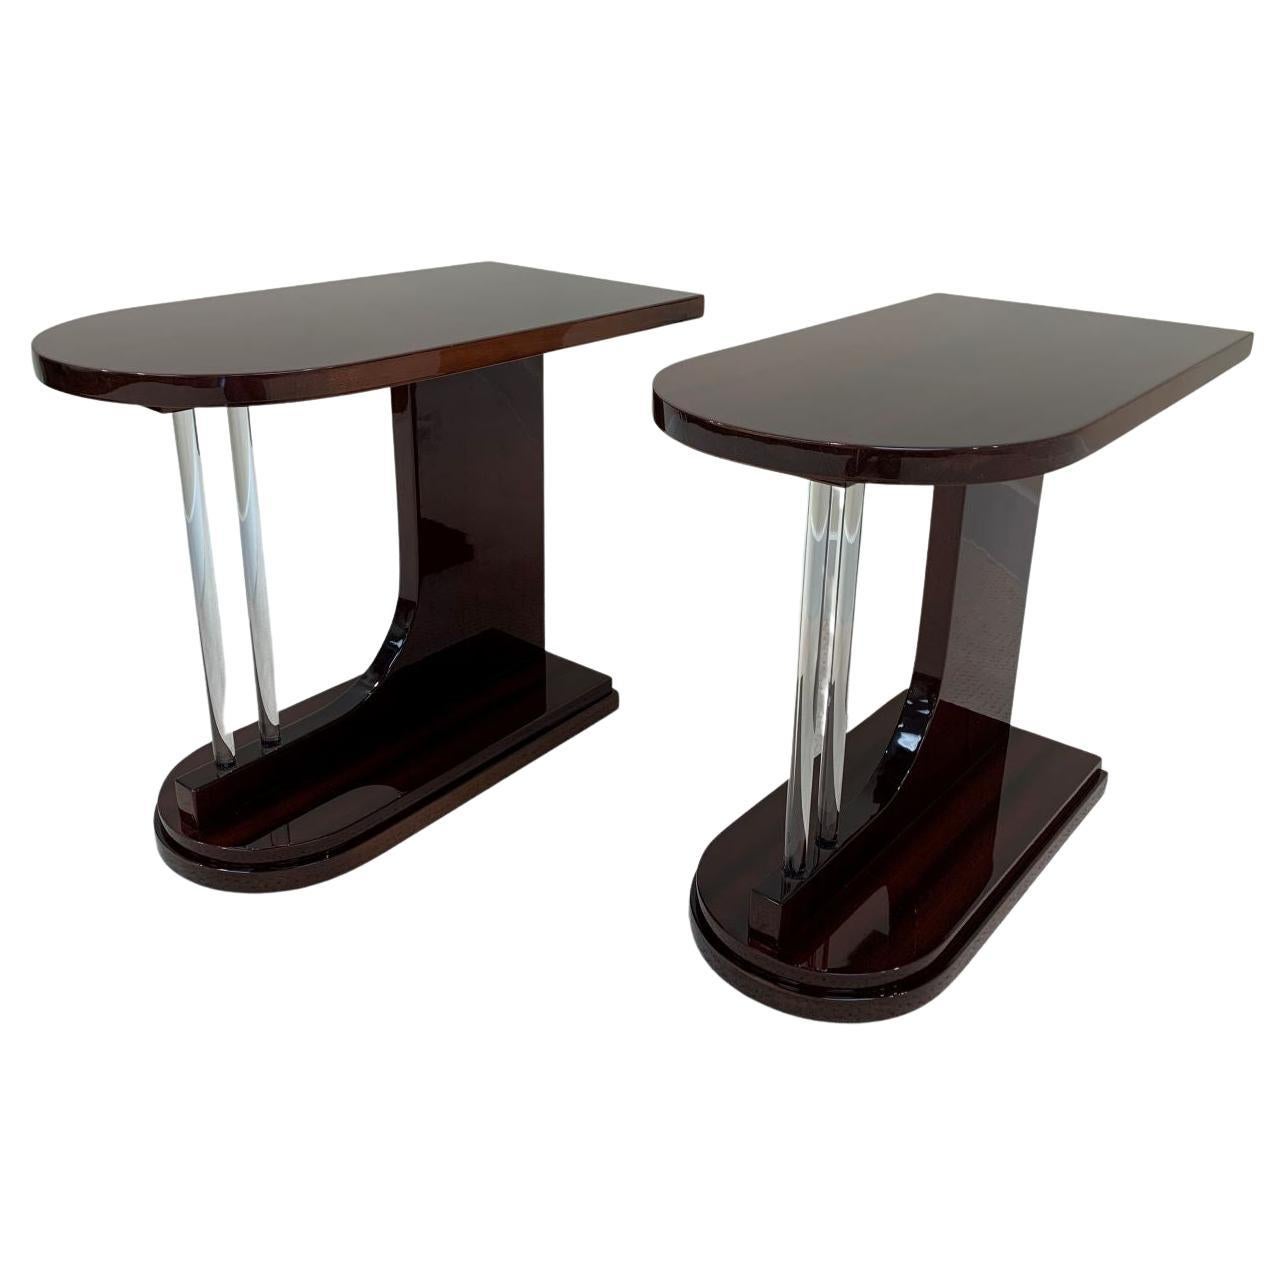 Pair of Machine Age Art Deco Side Tables. Also willing to sell as a single table. The tables have a unique bullet shape design with two solid glass decorative elements. The mahogany is beautifully restored in a gloss finish. Solid glass rod is three